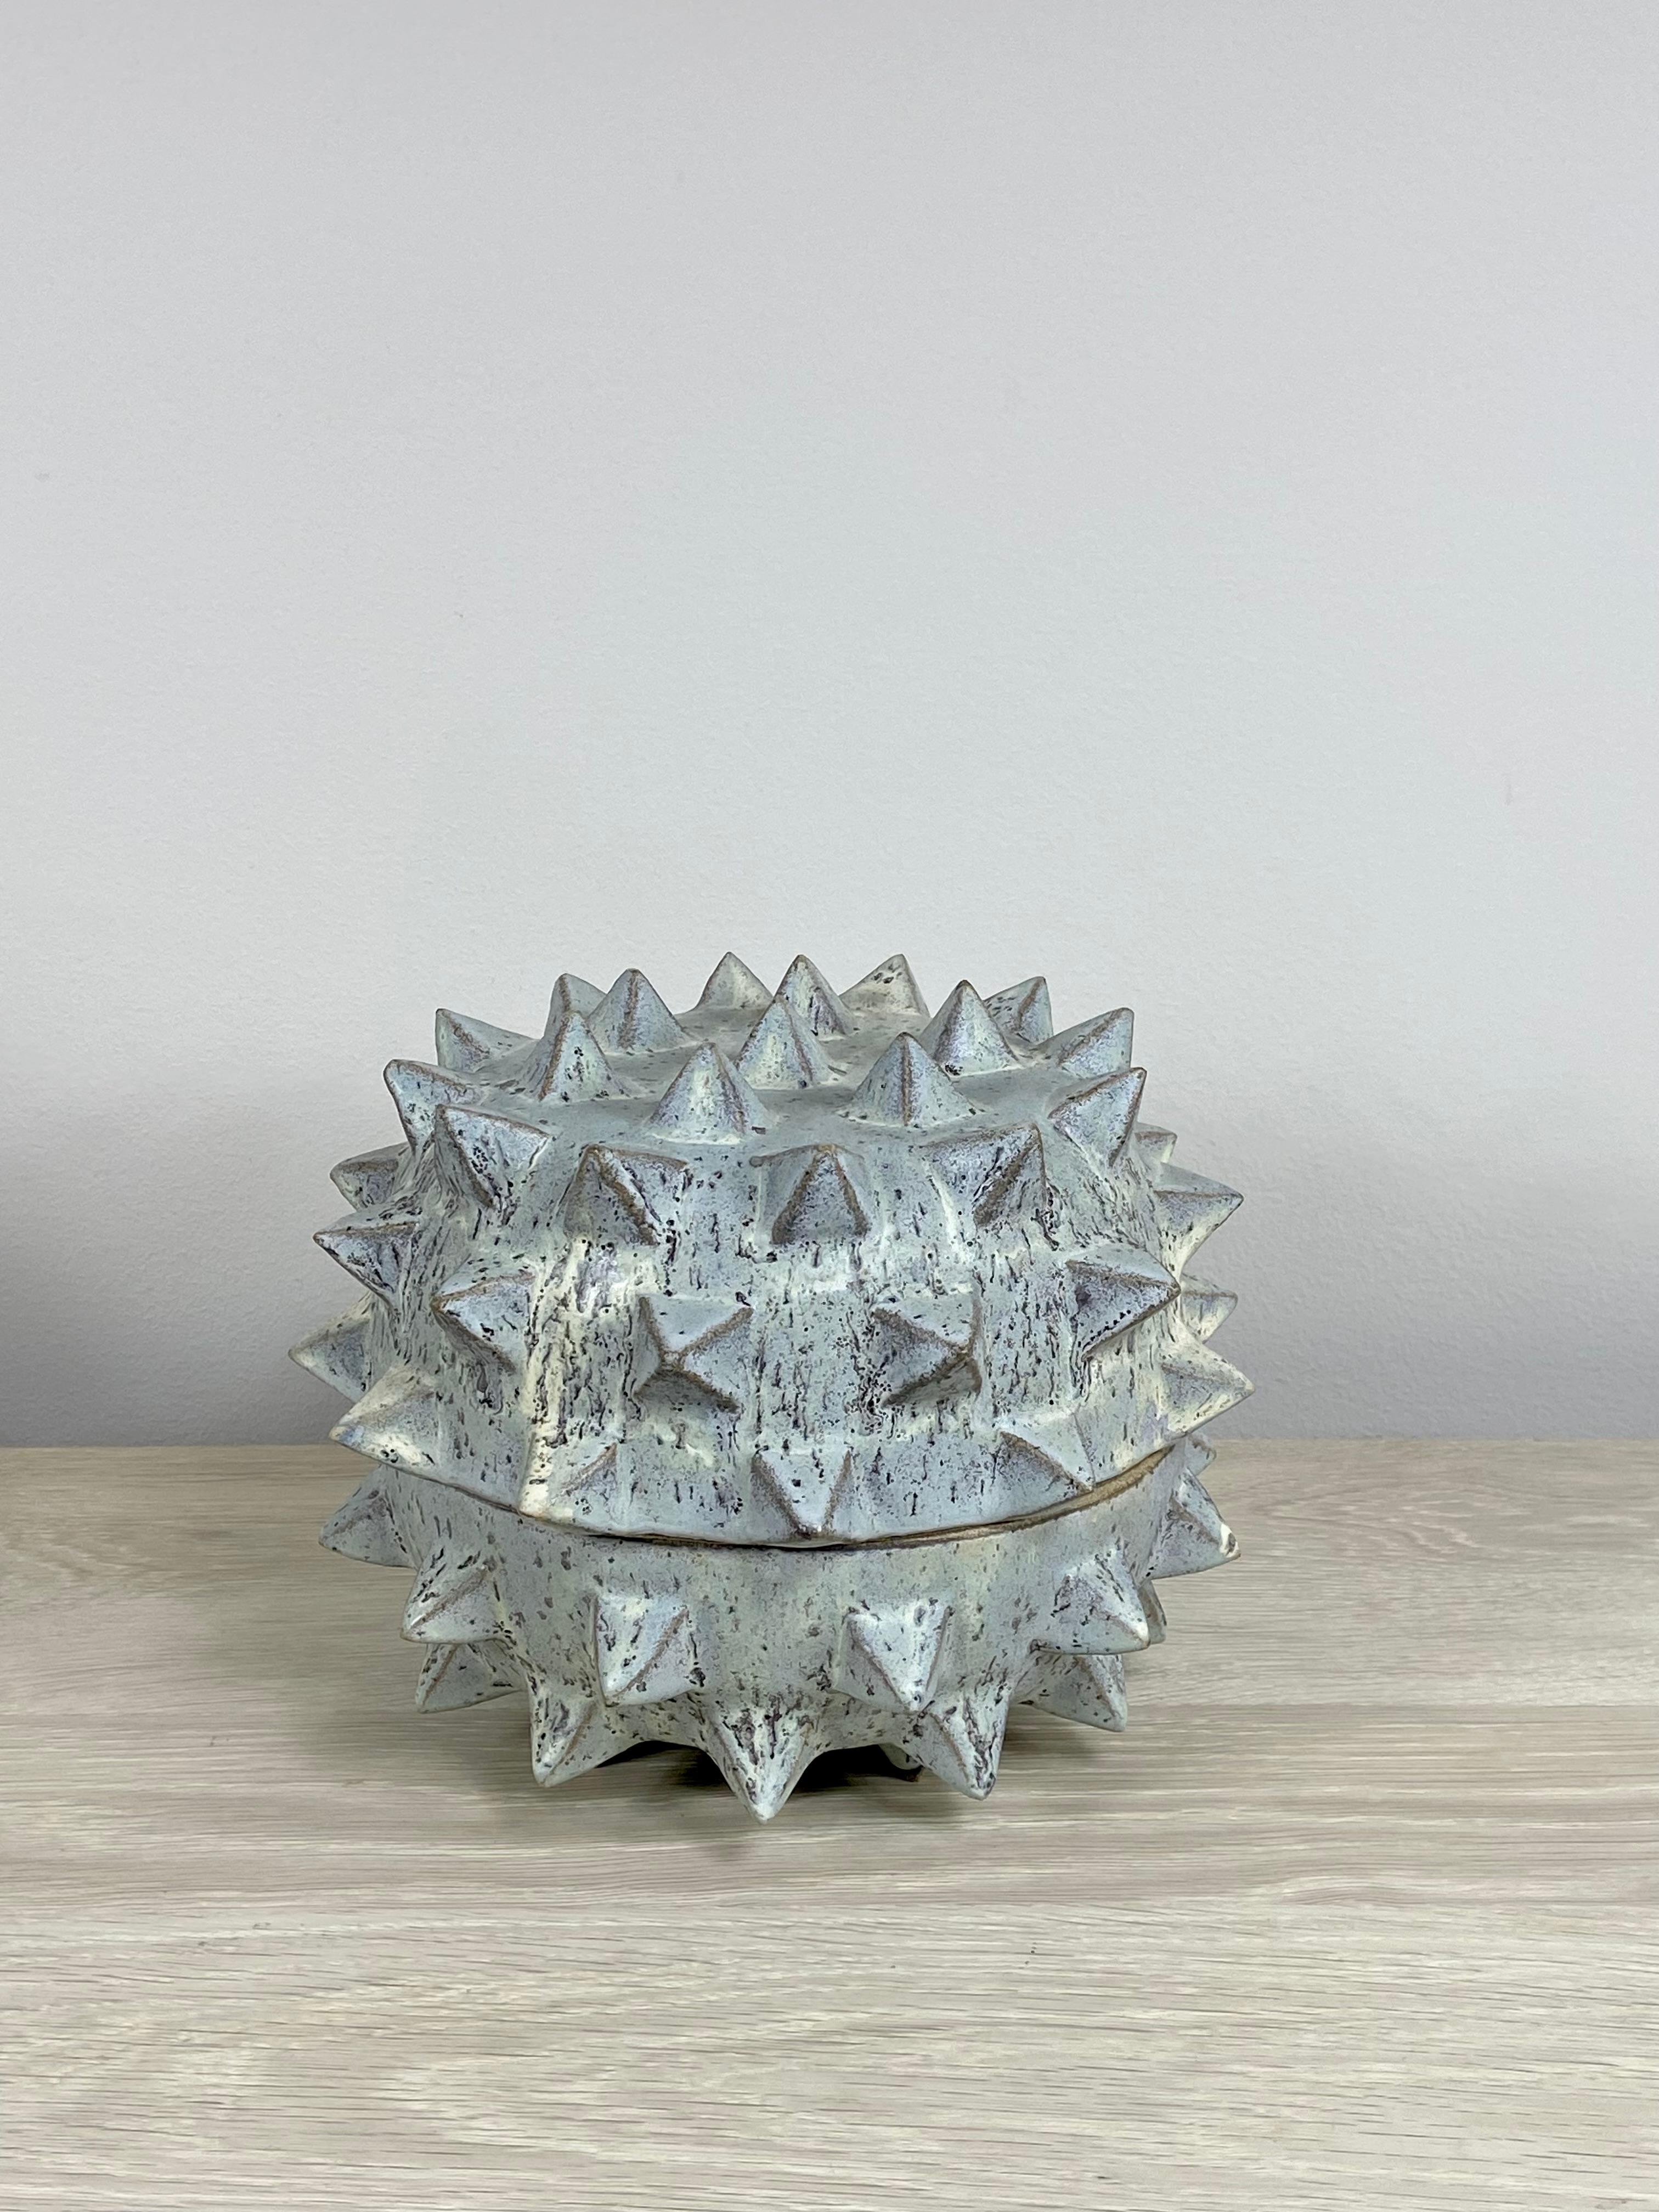 Spiky Ceramic Vessel By LGS Studio In New Condition For Sale In Norwalk, CT